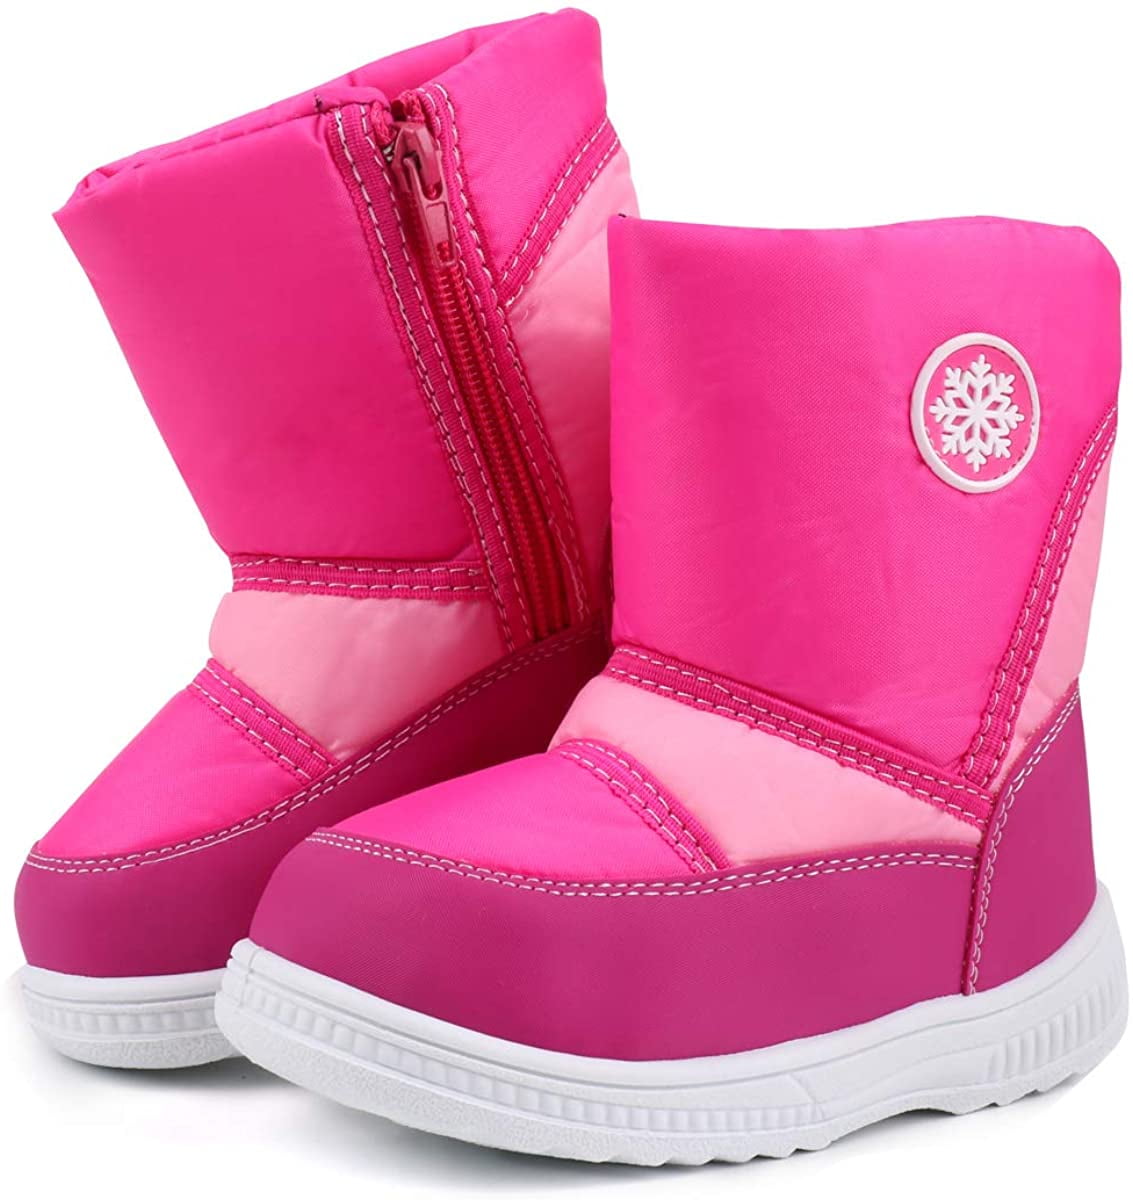 LONSOEN Childrens Winter Snow Boots for Girls Boys Cold Weather Outdoor Casual Fur Boots 